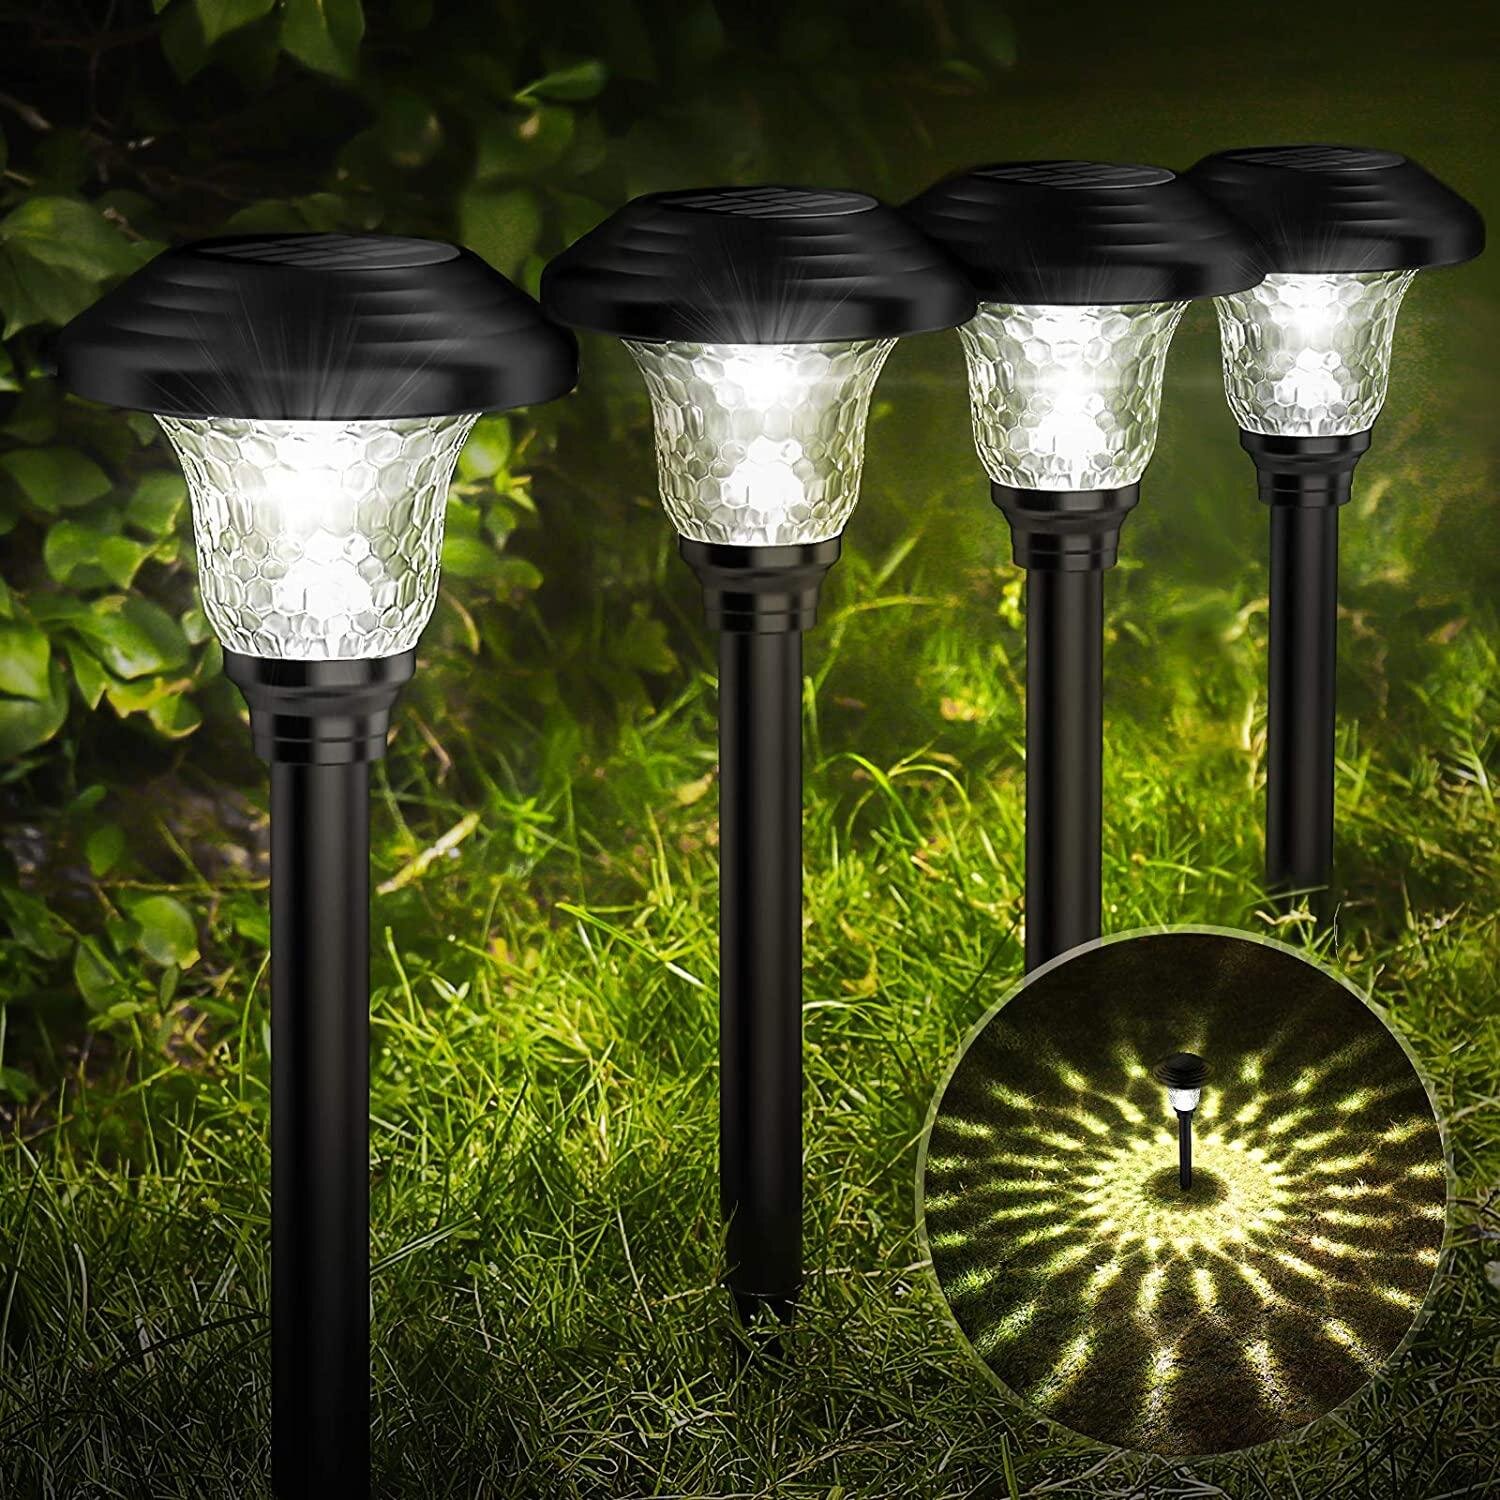 Stainless Steel Solar Lawn Decorative Lights LED Lamp Solar Charging Waterproof 